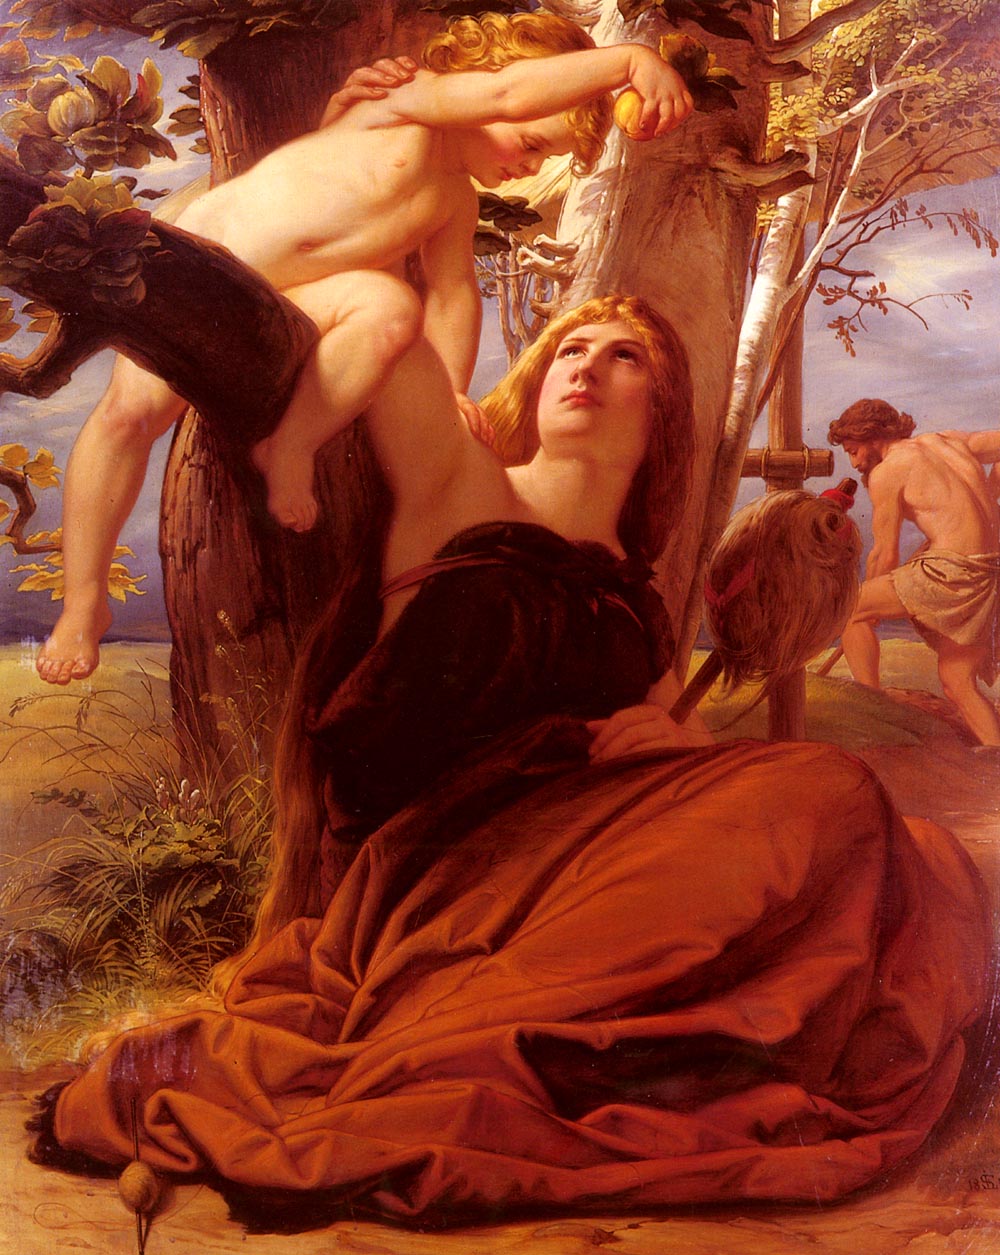 Adam and Eve after the Fall by Edward von Steinle